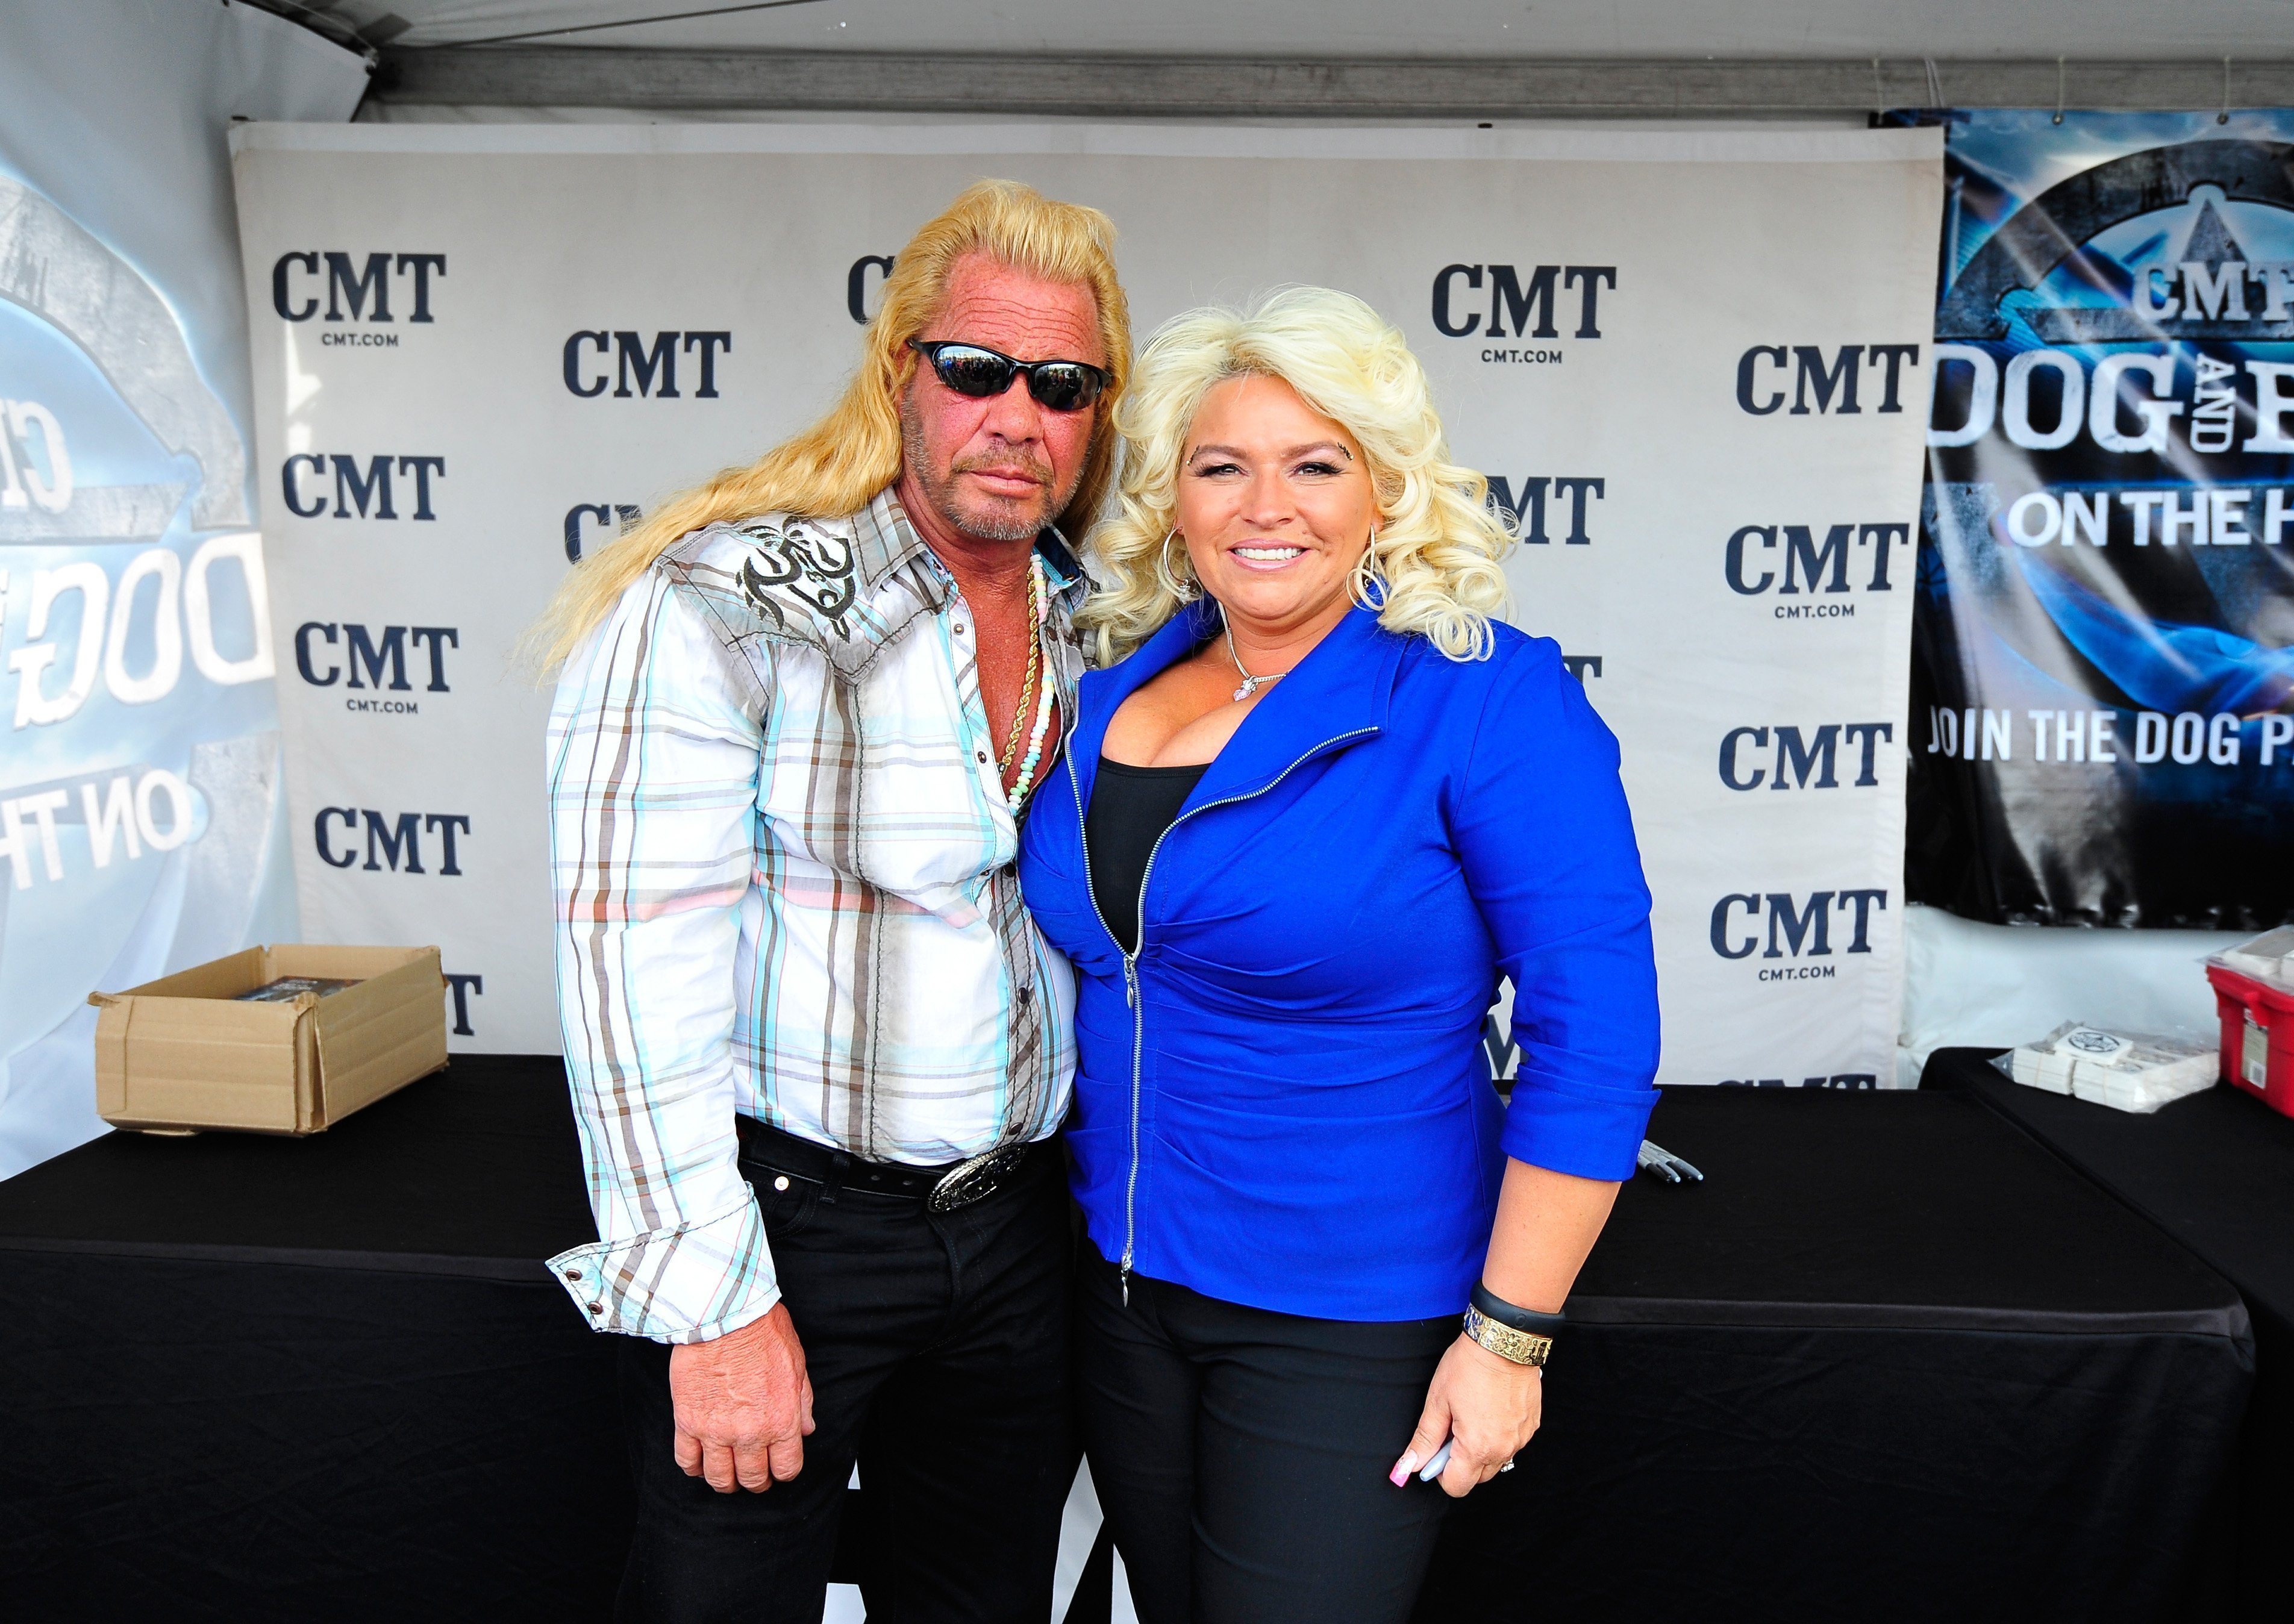 Duane 'Dog' and Beth Chapman at the ACM Experience during the 48th Annual Academy of Country Music Awards on April 5, 2013 in Las Vegas, Nevada | Photo: Getty Images